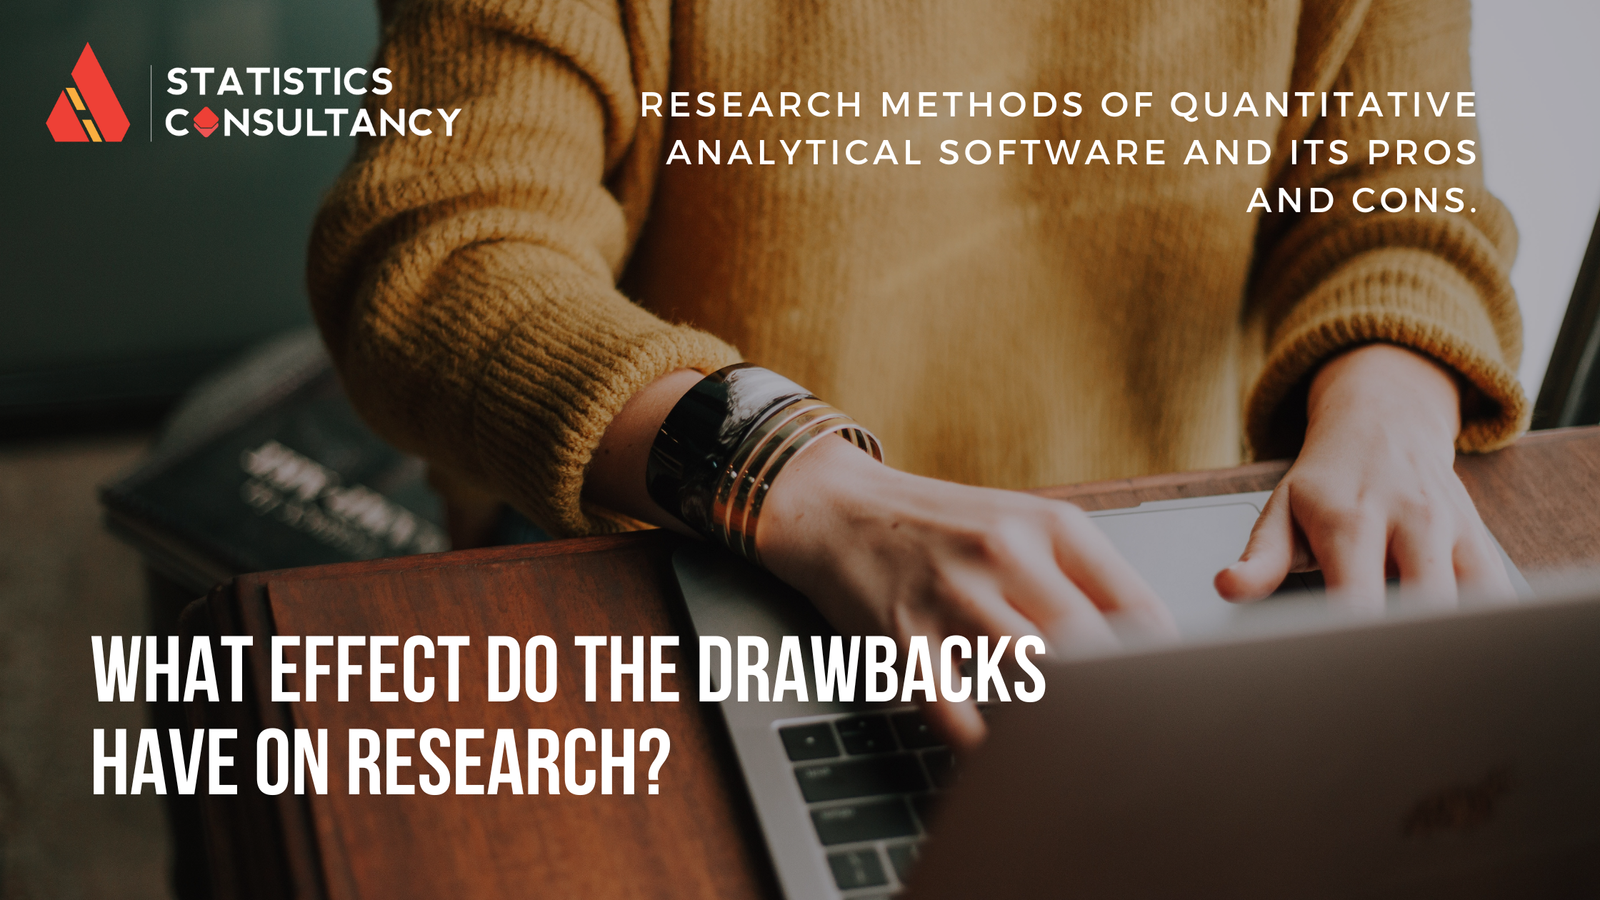 Research methods of Quantitative Analytical Software and its pros and cons. What Effect Do the Drawbacks Have on Research?